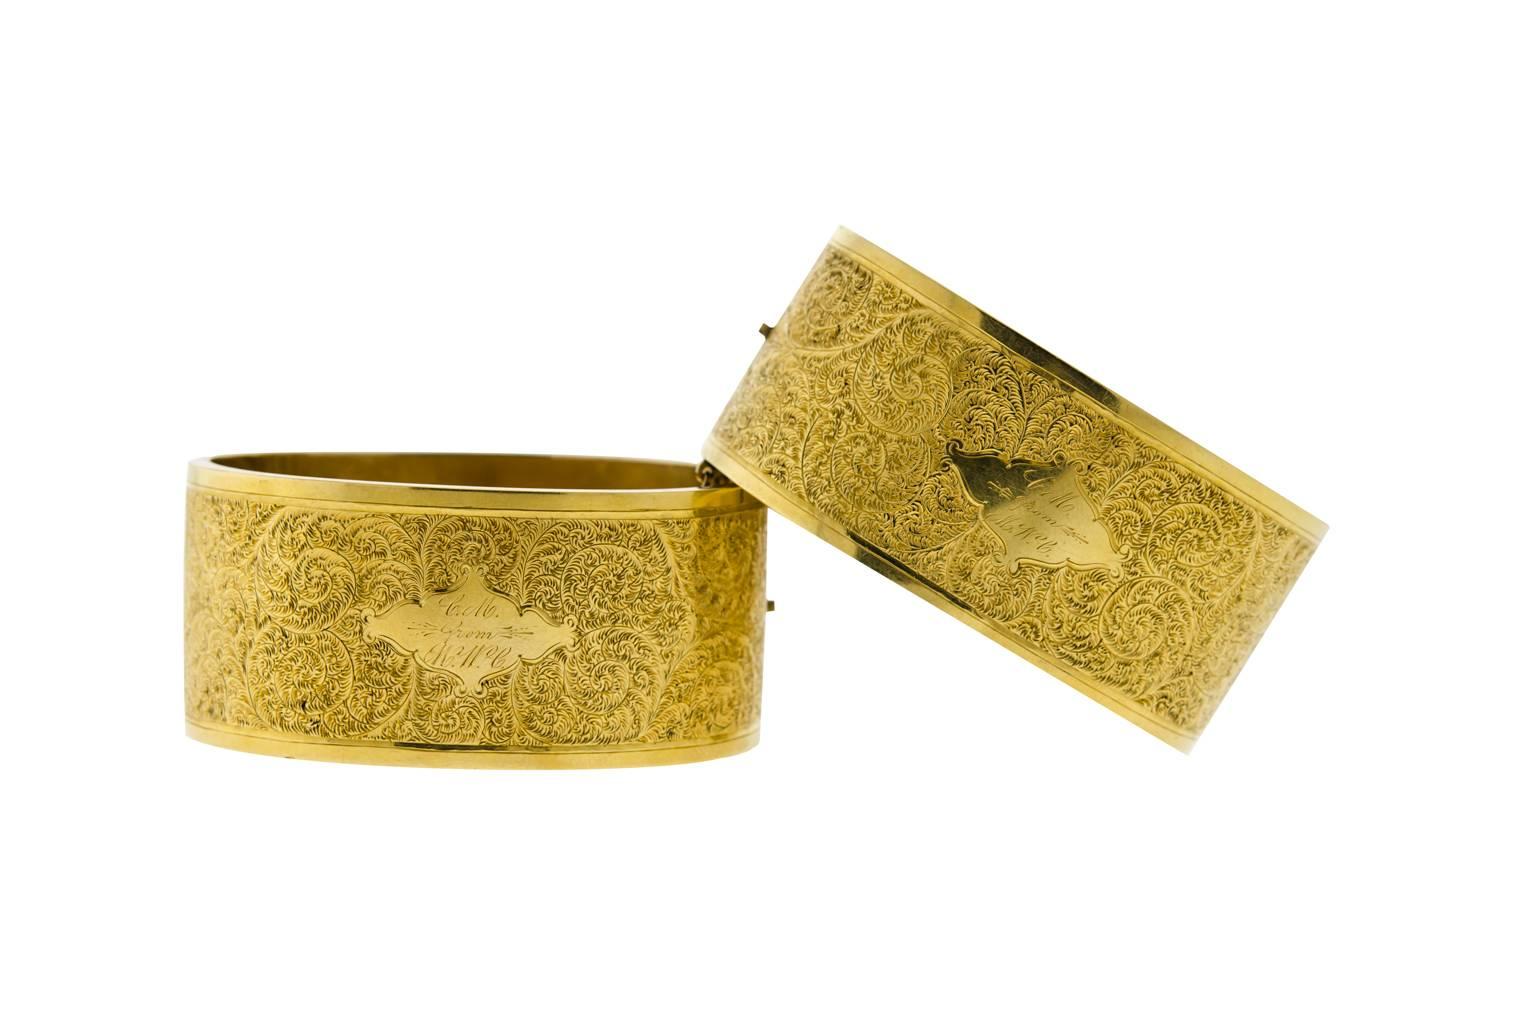 Beautiful pair of Victorian 14 karat yellow gold stiff hinged bangle cuff bracelets. Measuring 1 1/8” wide. Very fine detailed engraving on both sides. No denting. One bracelet has small rub mark on the rim. Each bracelet has one gold safety chain.